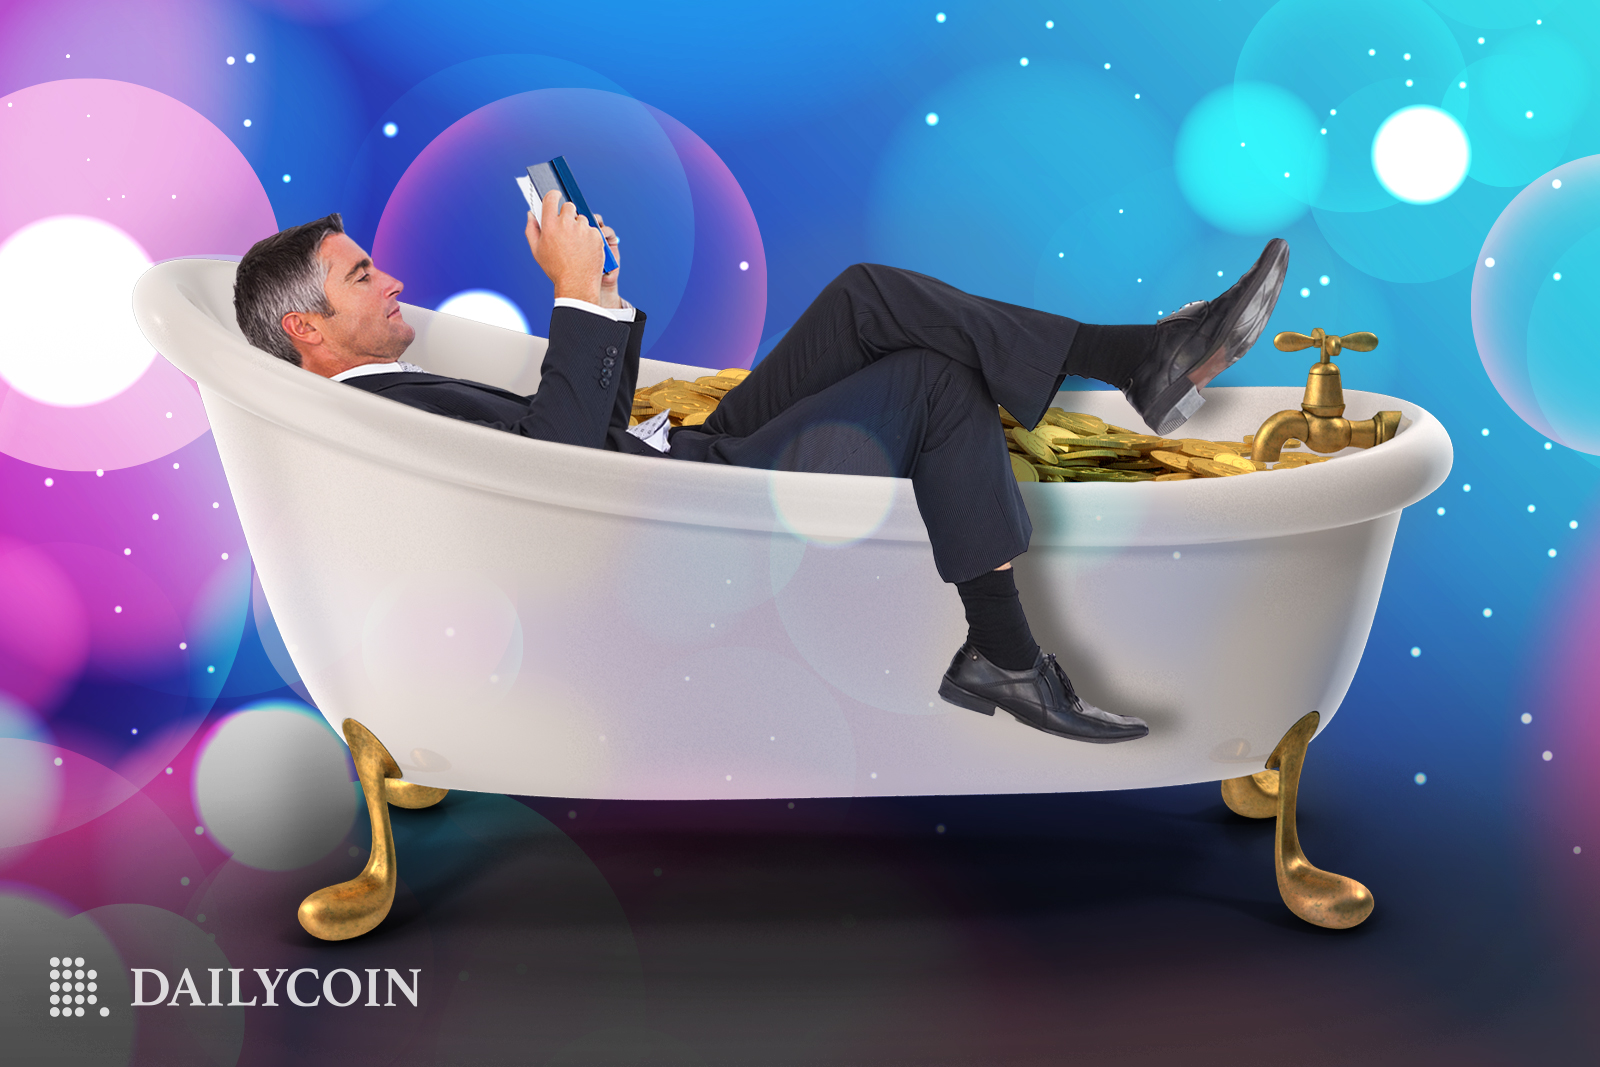 A man in a suit is taking a bath while reading a book in a bathtub full of coins.